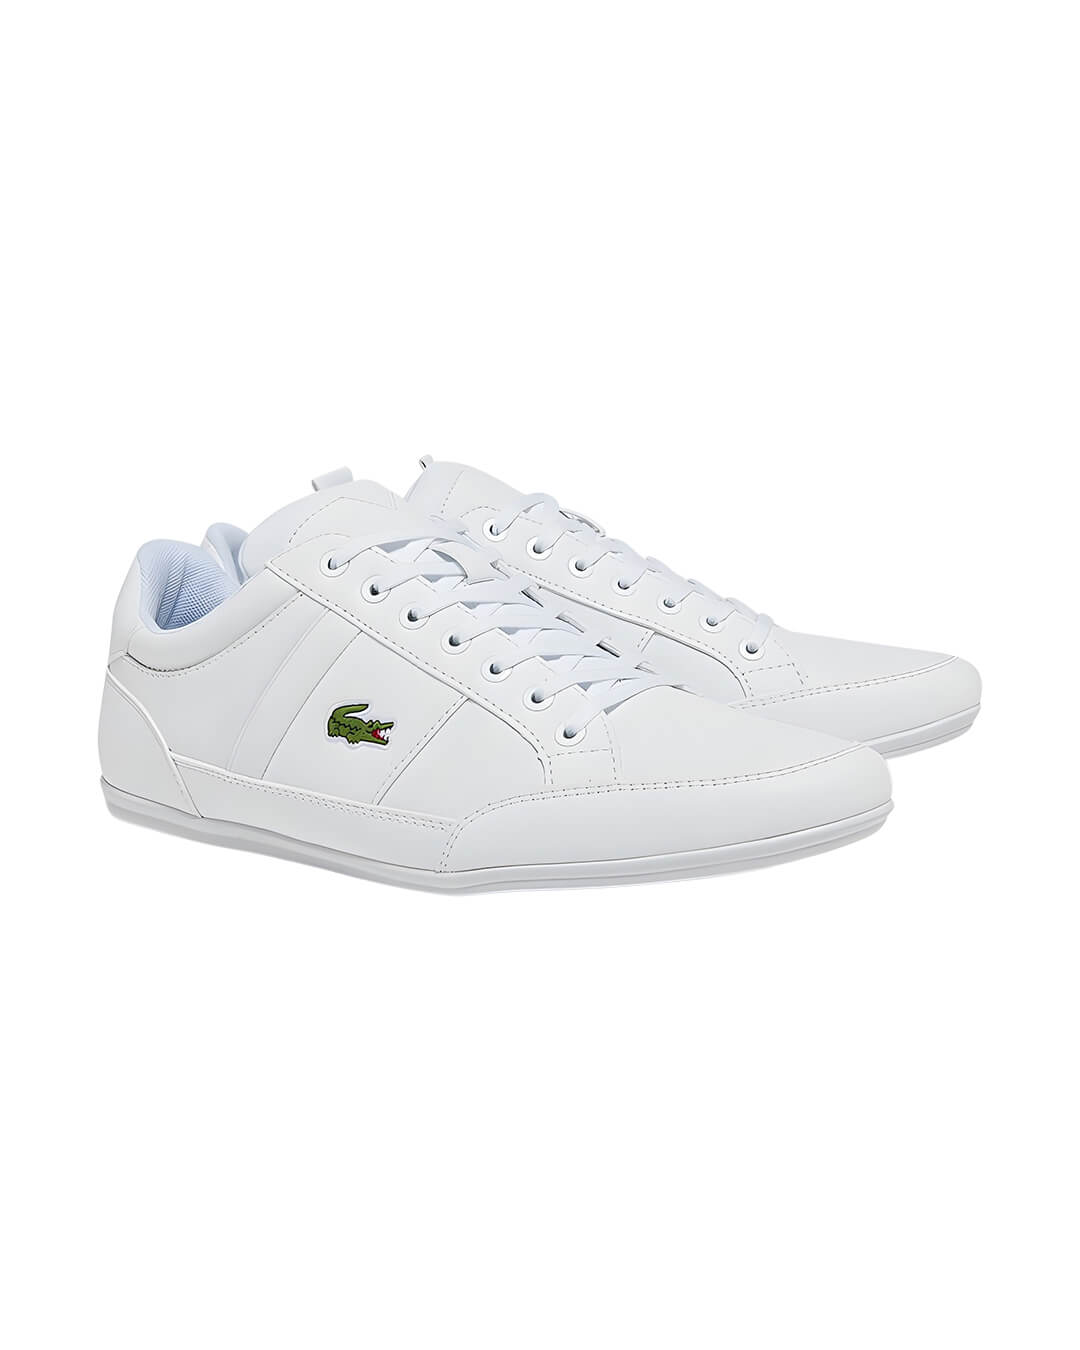 Lacoste Shoes Lacoste Chaymon White Sneakers